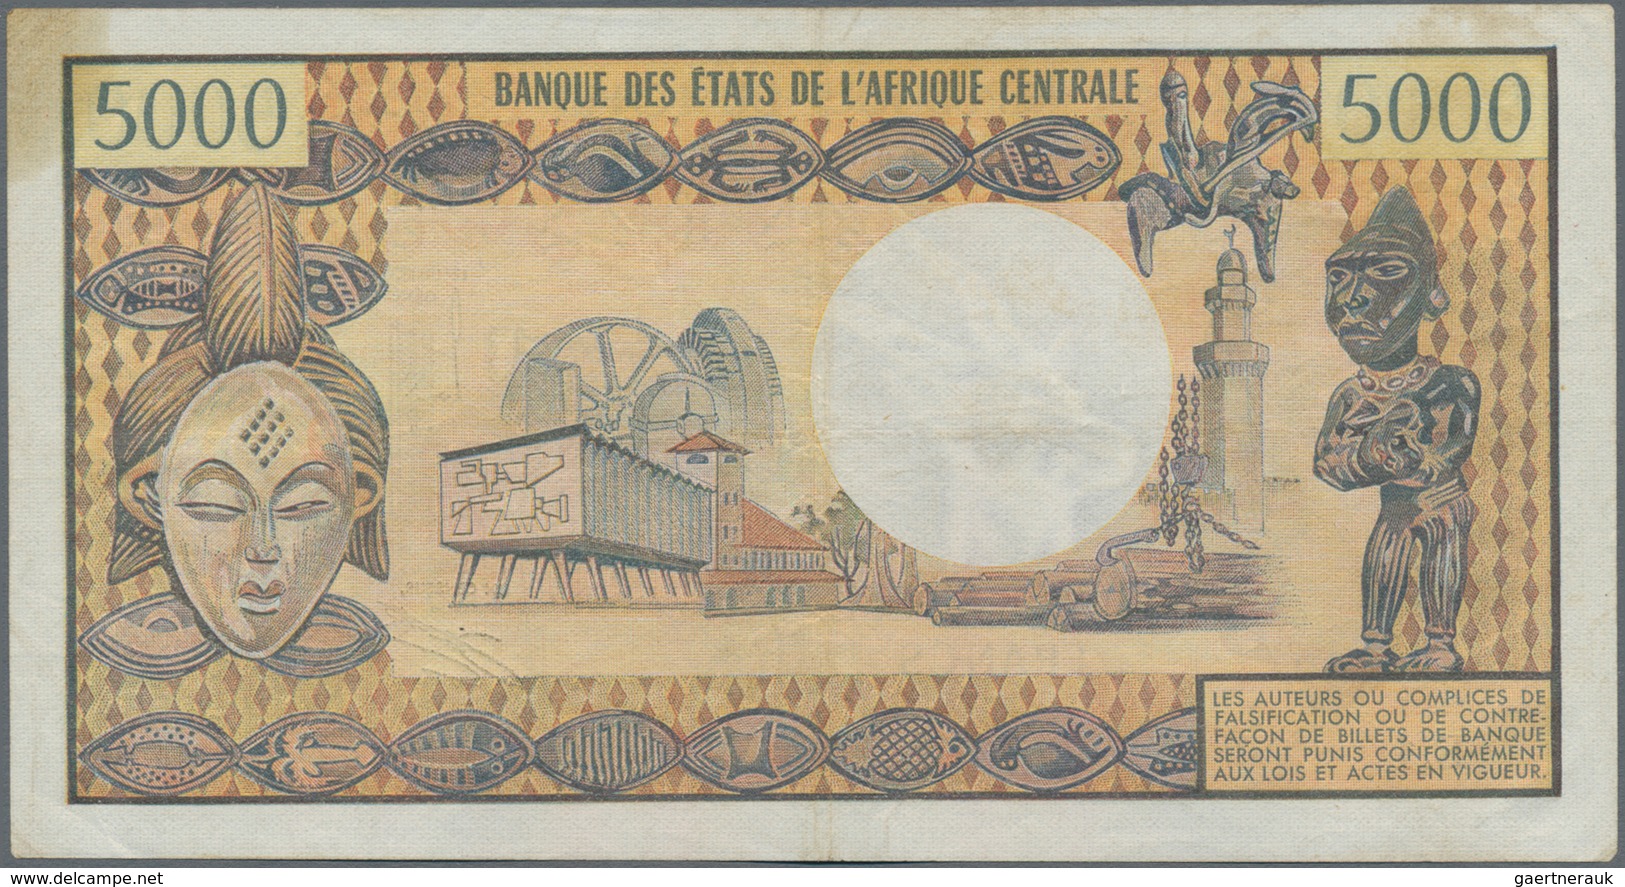 Chad / Tschad: Republique Du Tchad 5000 Francs ND(1974), P.4, Nice And Rare Note, Some Minor Stains - Chad